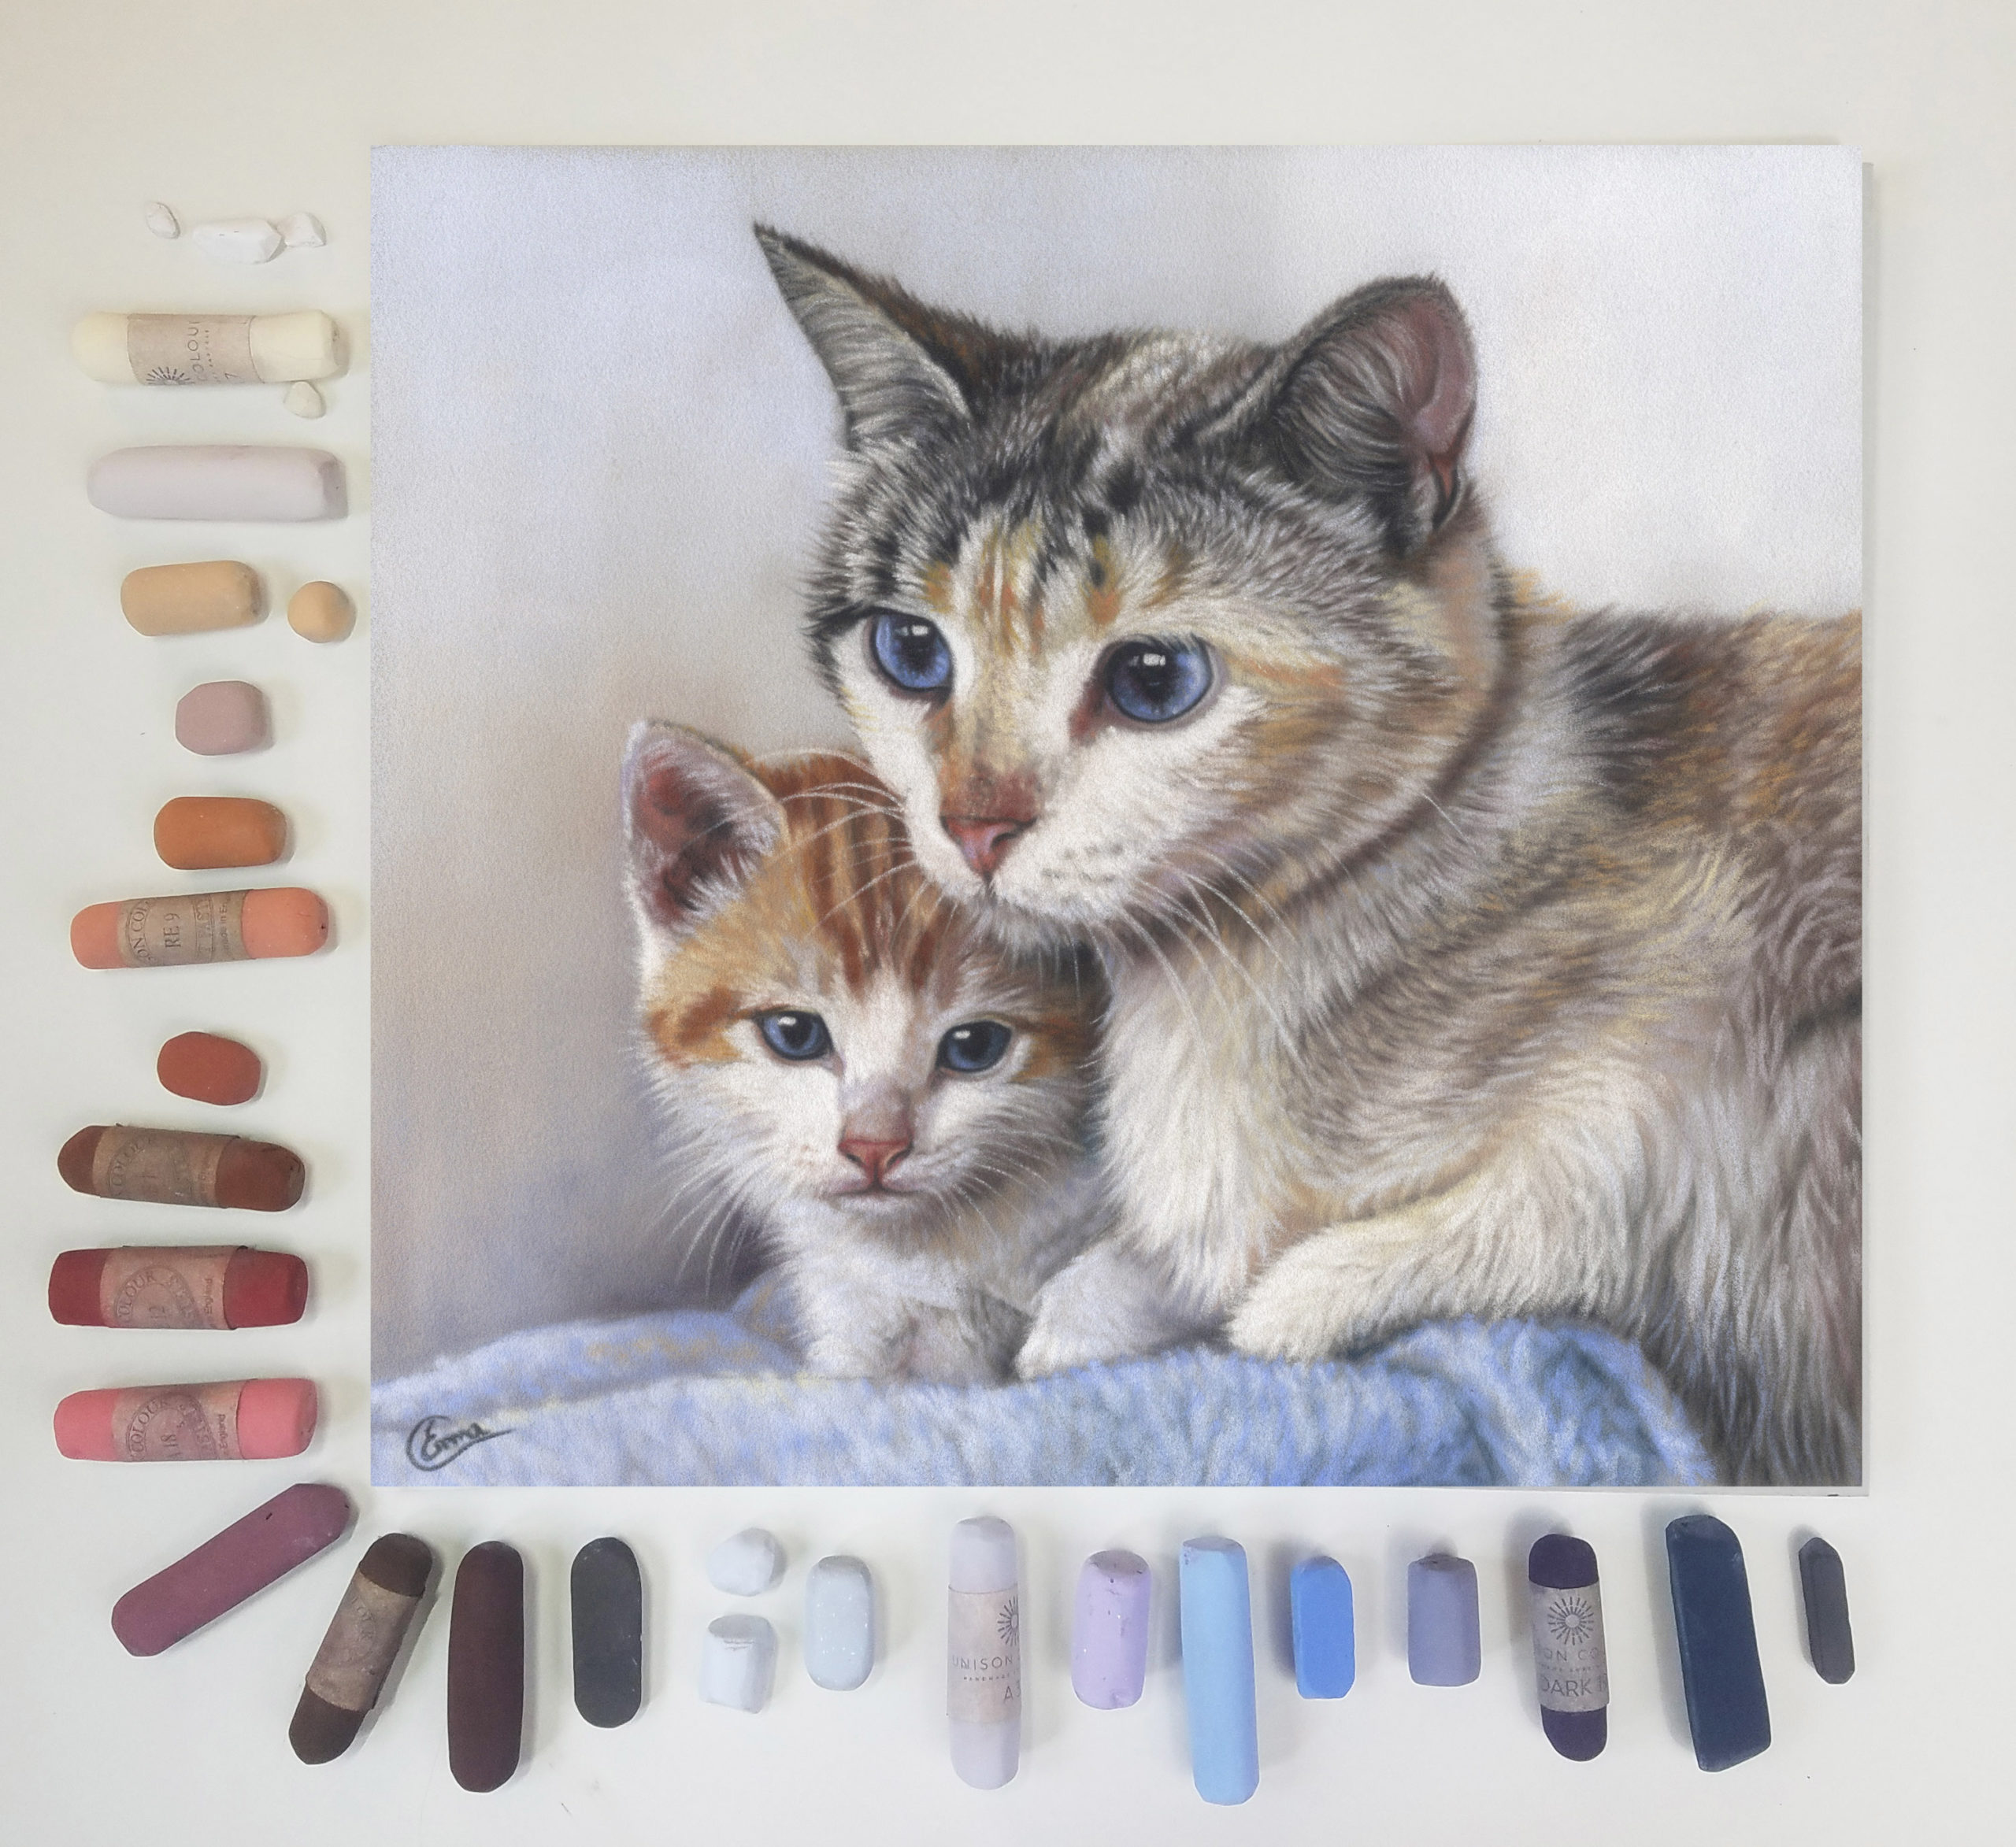 Emma Colbert, Cat and Kitten, soft pastel on velour, 12 x 10 in - choosing a colour palette